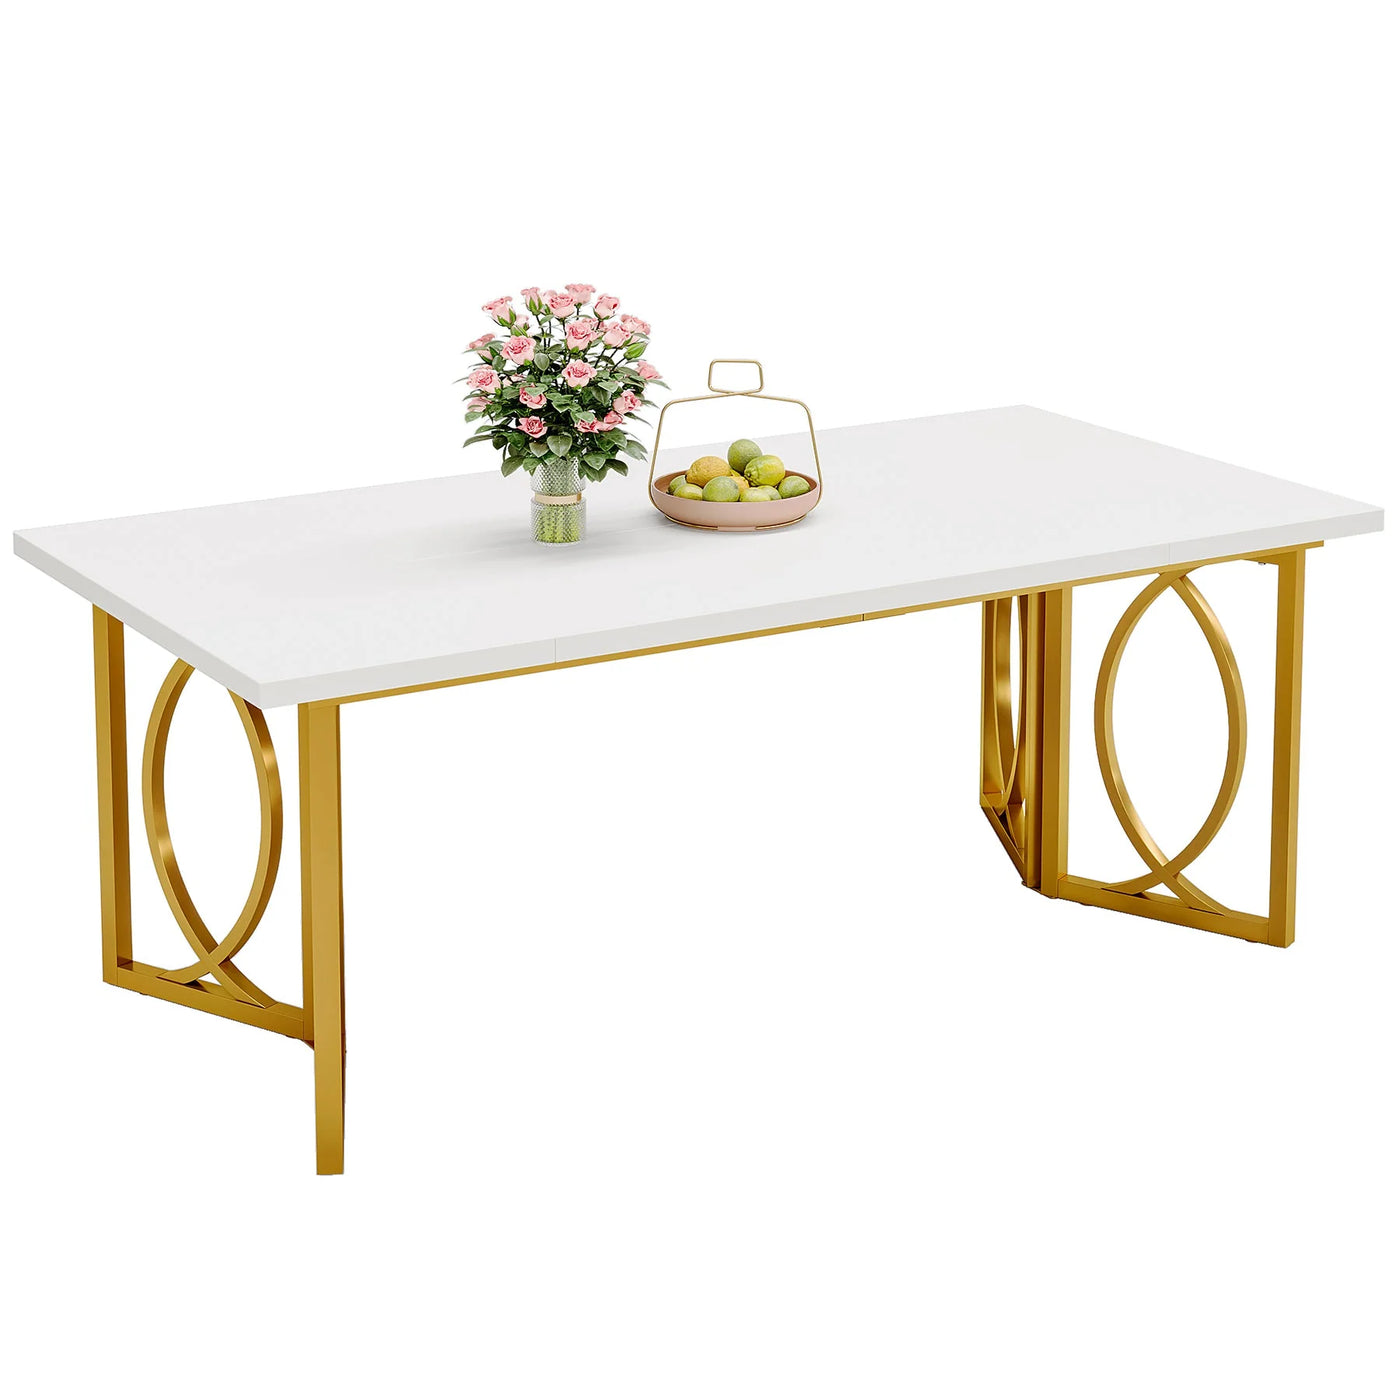 Montreal 70.9-Inch Wood Dining Table |  Modern Rectangle Kitchen Table for 4-6 People